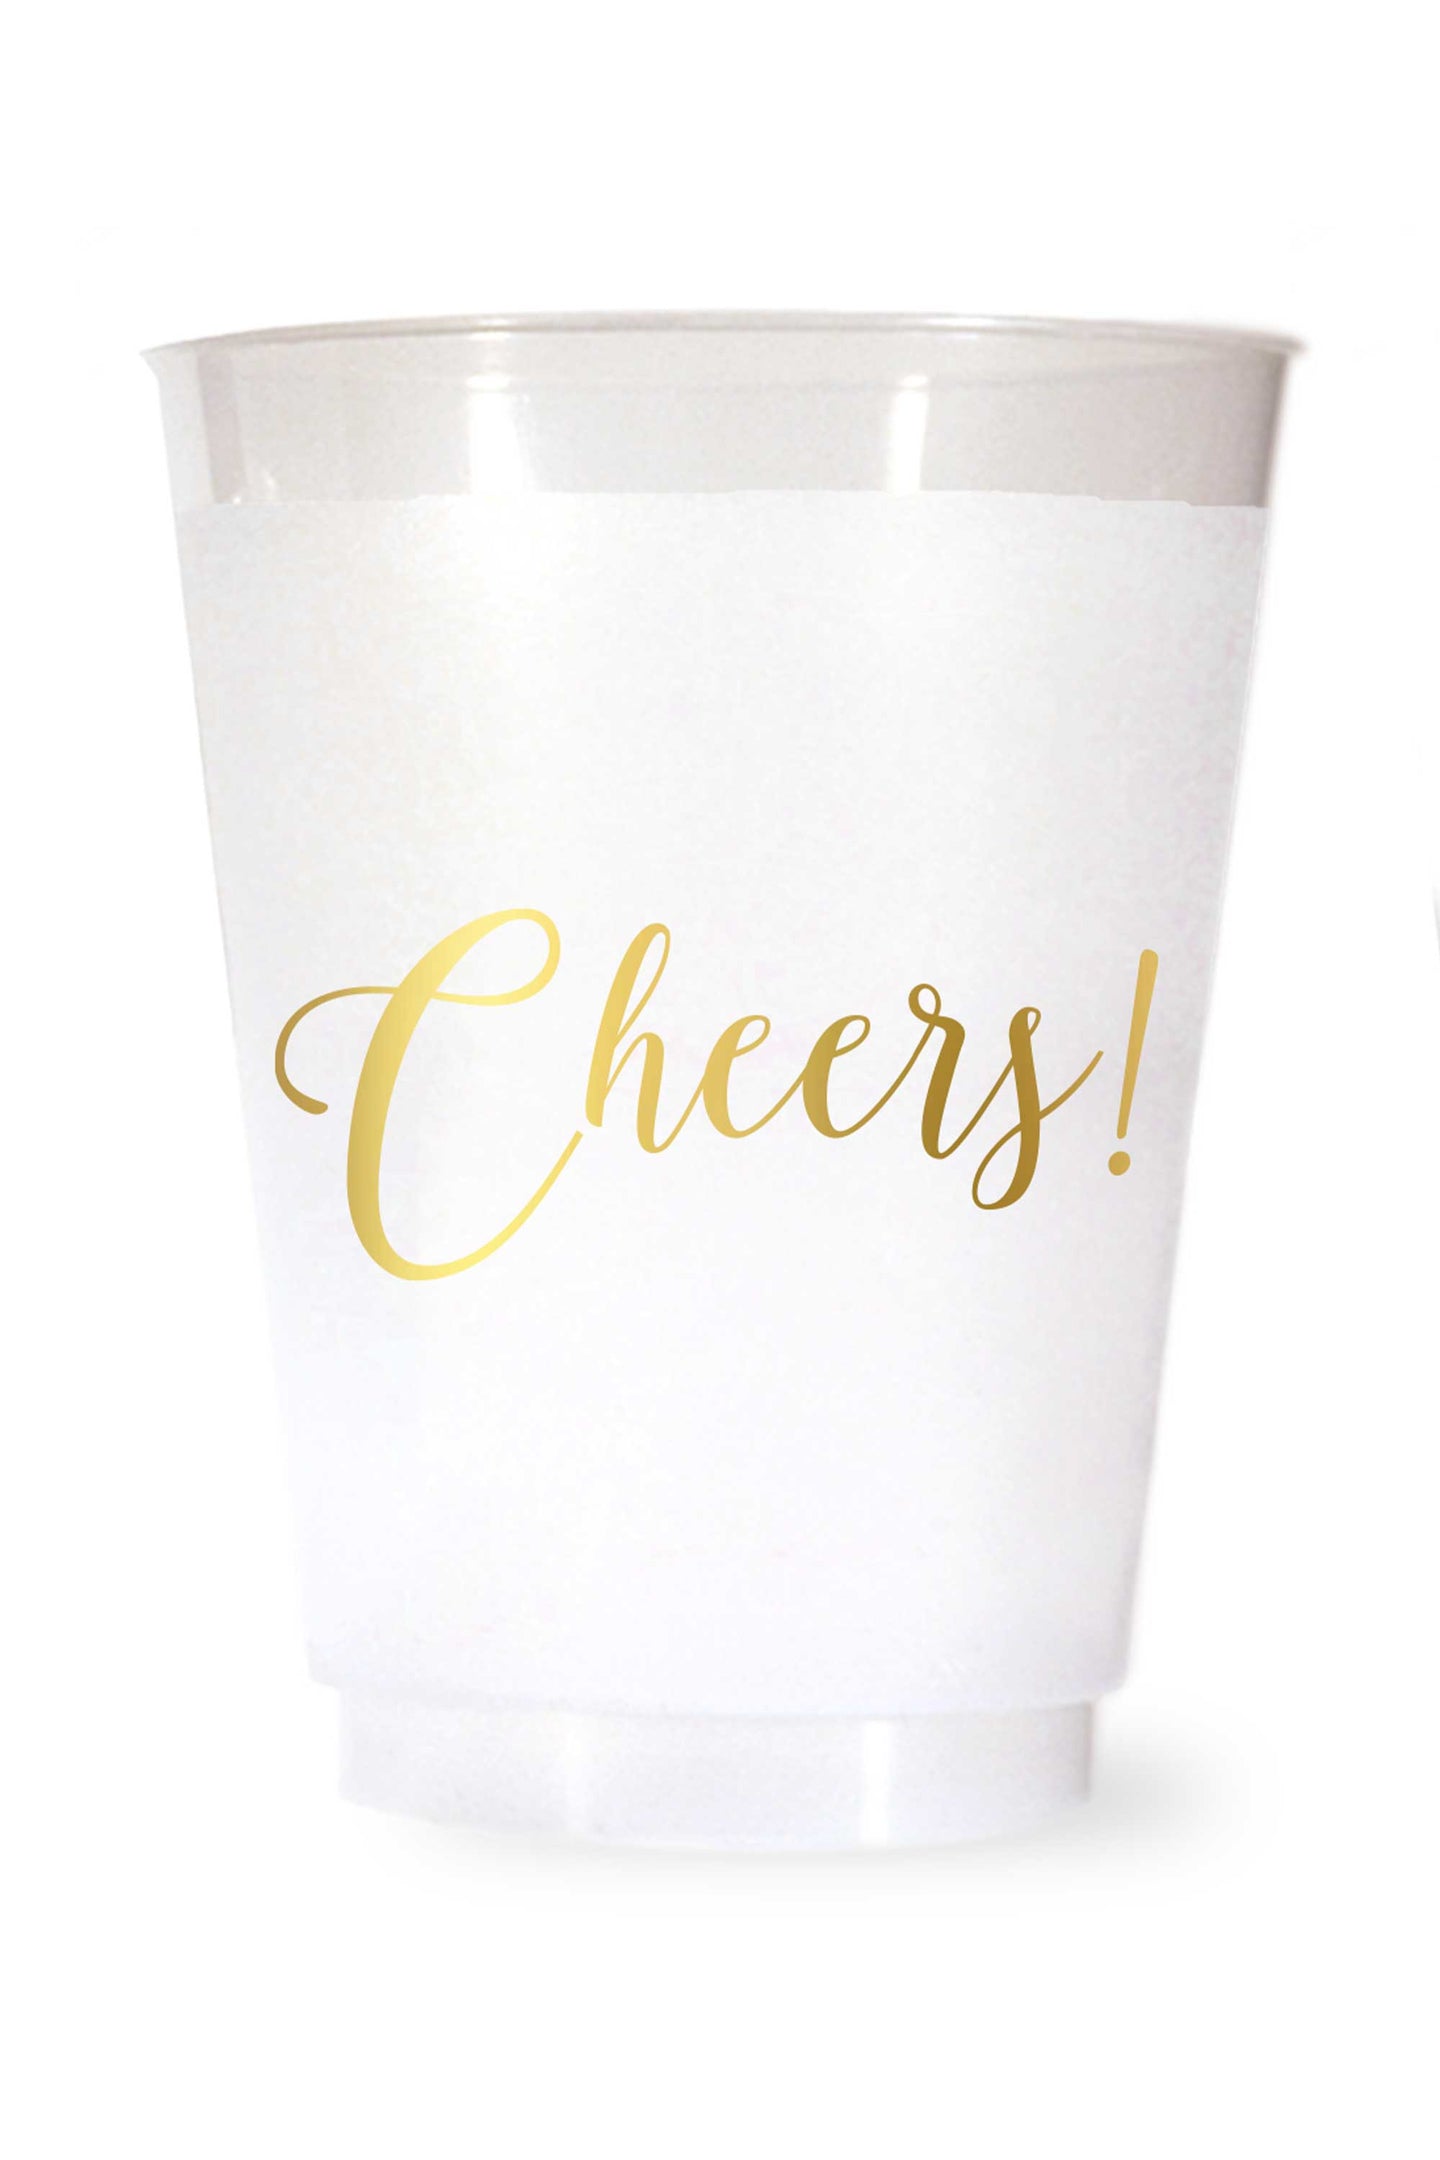 Cheers Cups